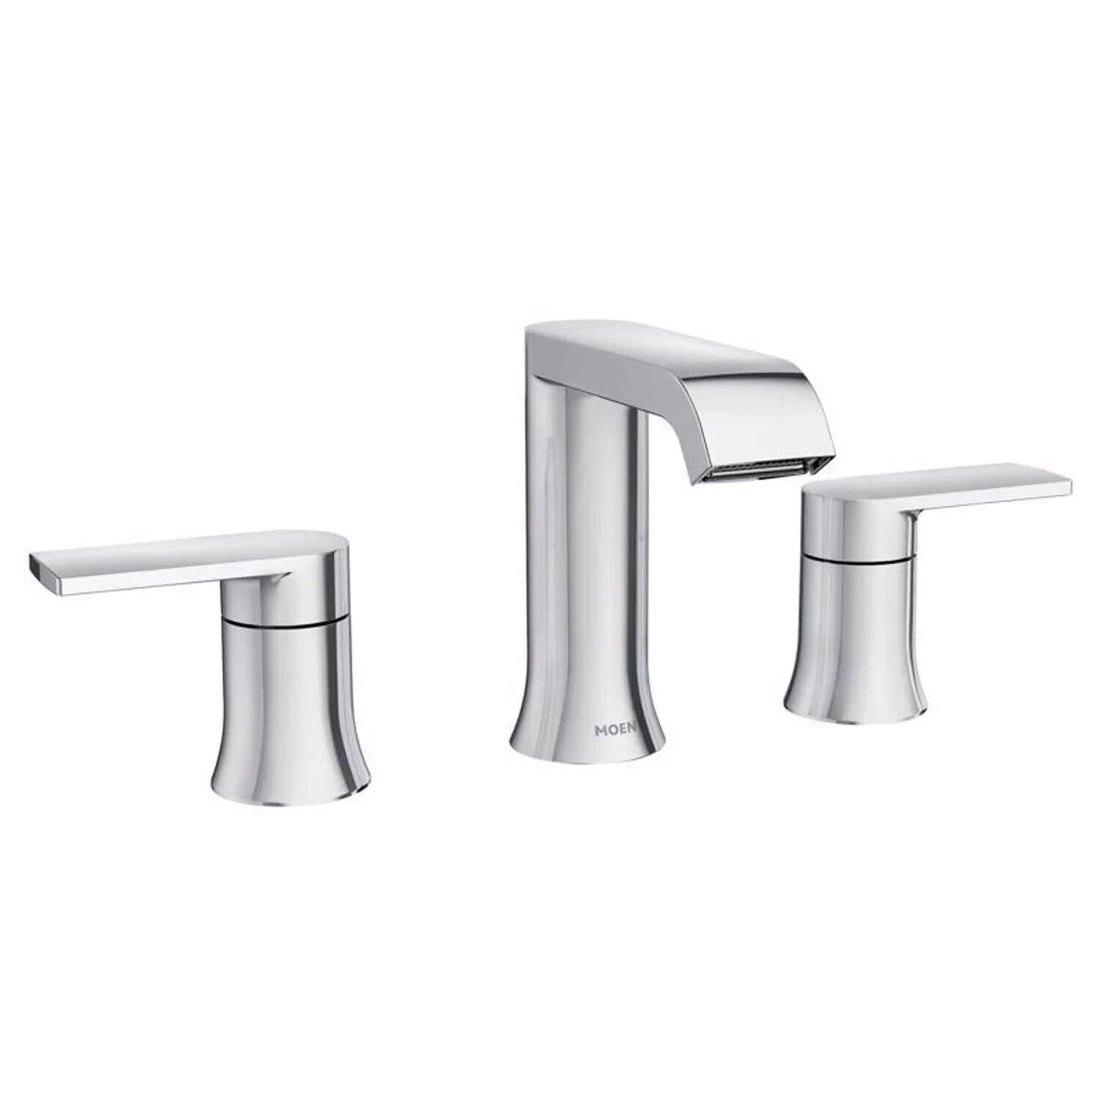 Genta 8 in. Widespread Double Handle Bathroom Faucet in Chrome (Valve Included) - Like New